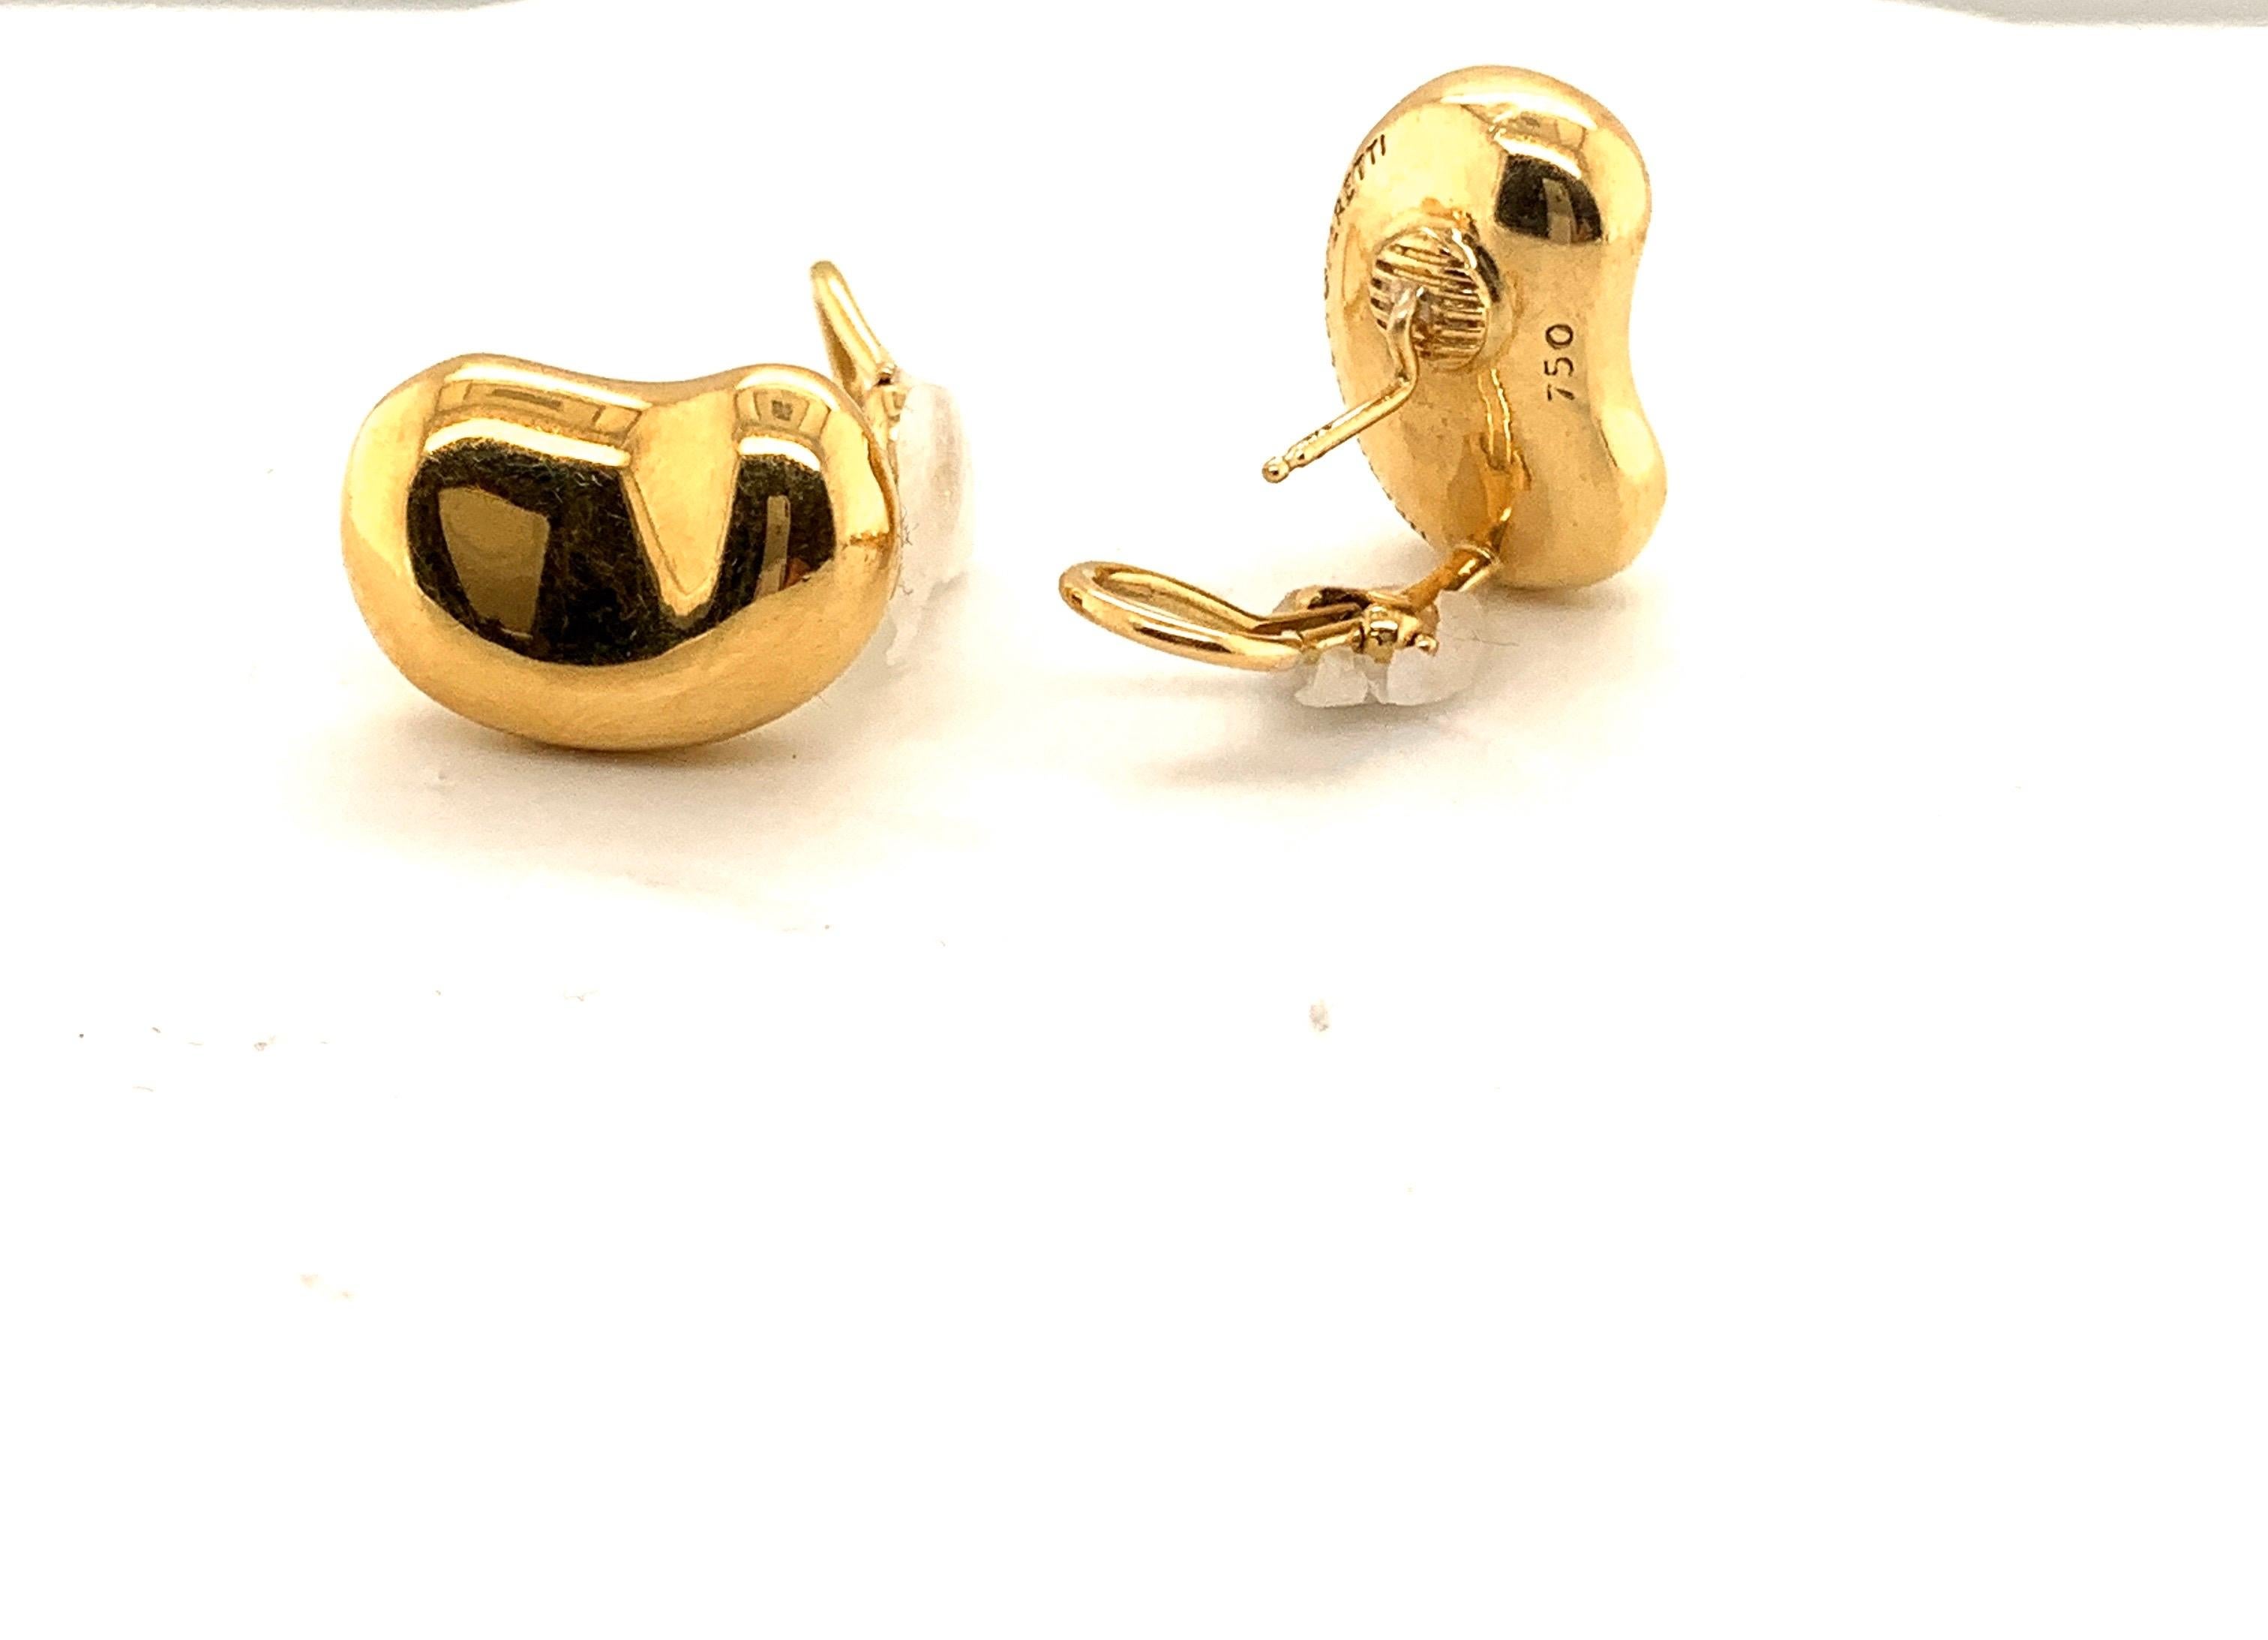 Super large bean earrings. From the famous Tiffany and Co. designer Elsa Peretti. This iconic Bean represents all things Tiffany.
Large Bean in 18k solid gold stamped Peretti Tiffany.


All items sold are accompanied by an appraisal done by our